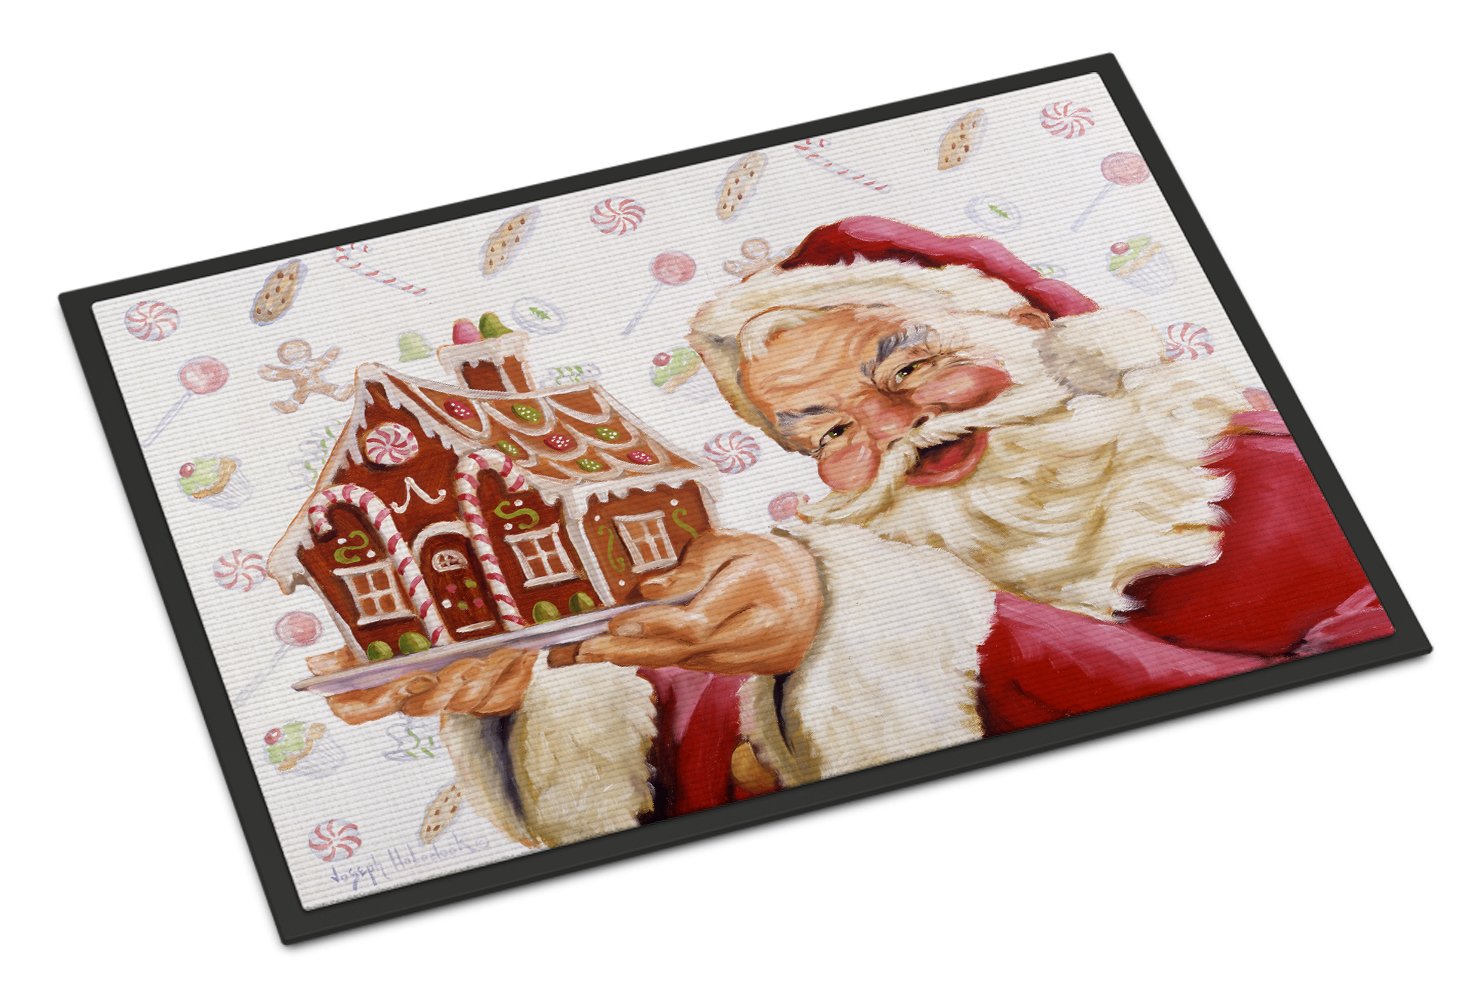 Santa Claus A Home for the Holidays Indoor or Outdoor Mat 24x36 PJH3006JMAT by Caroline's Treasures